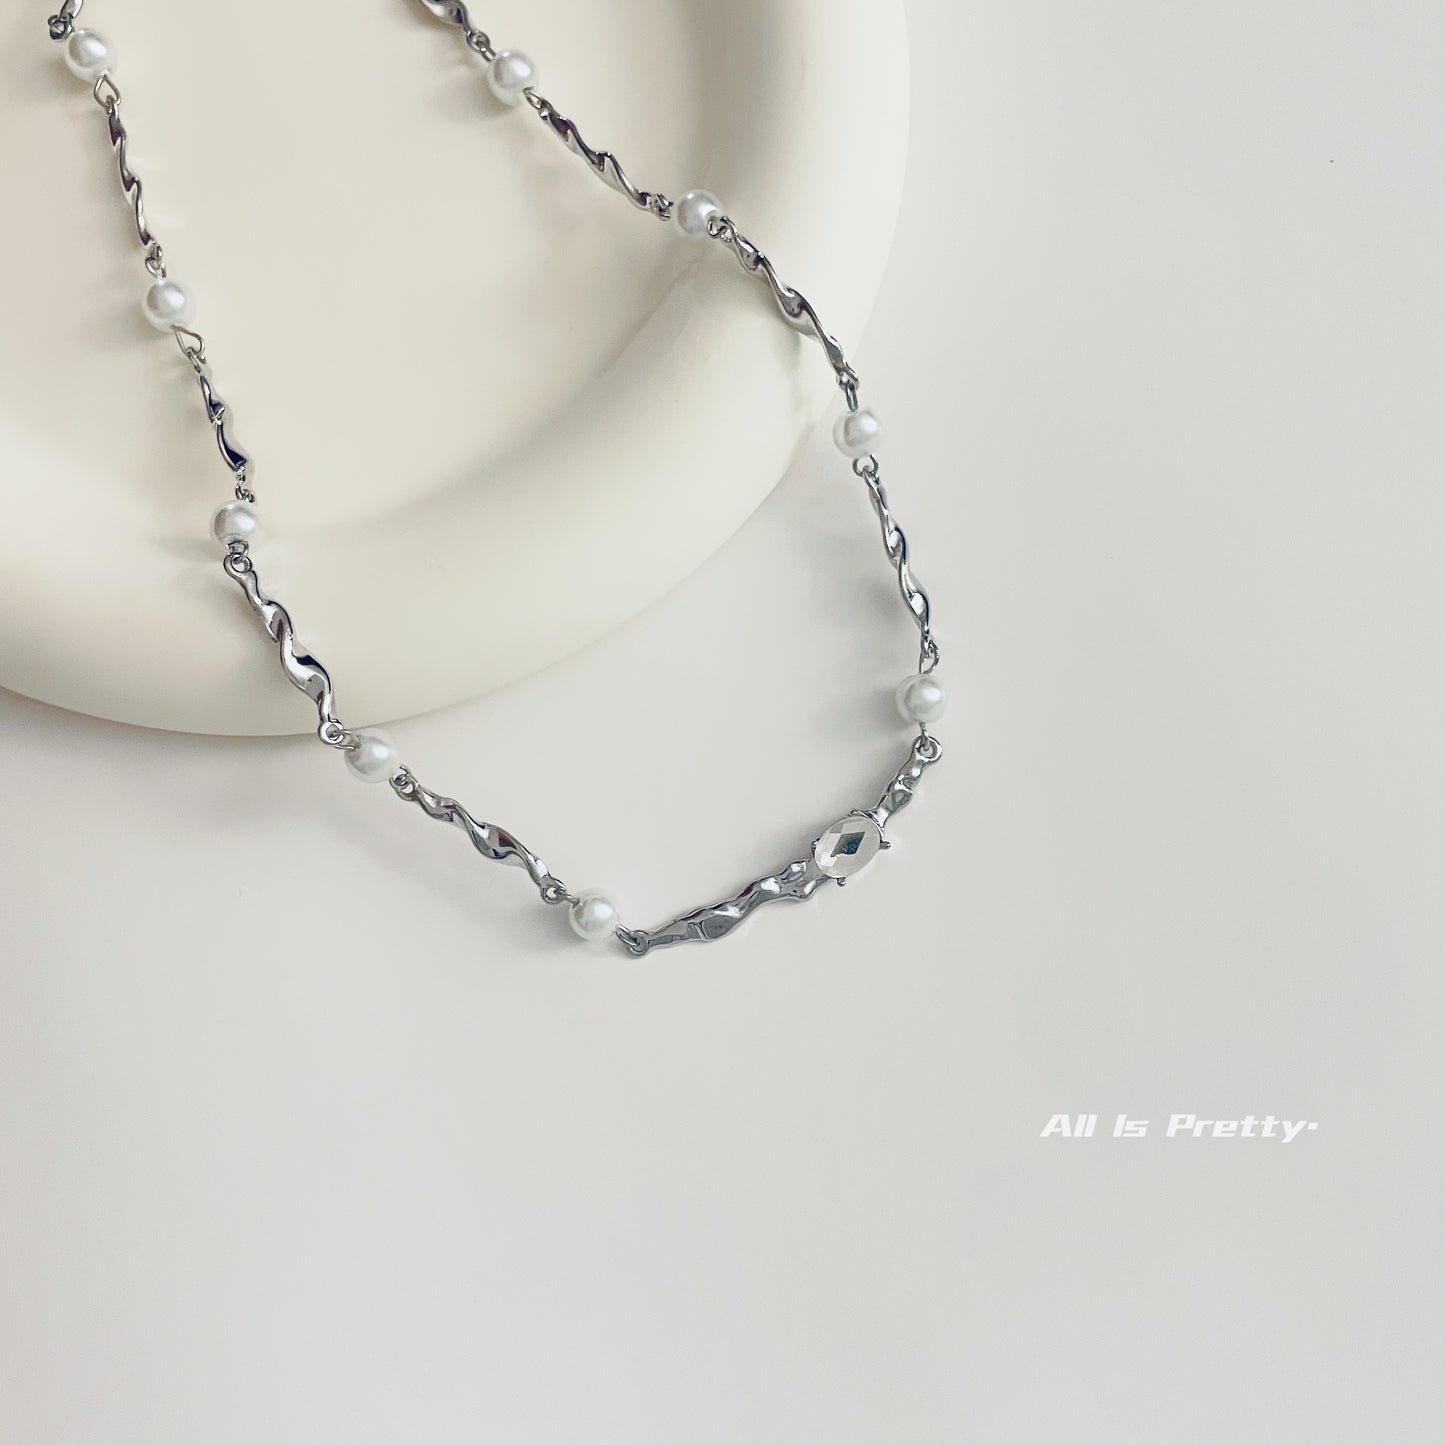 Linked chain pearl necklace